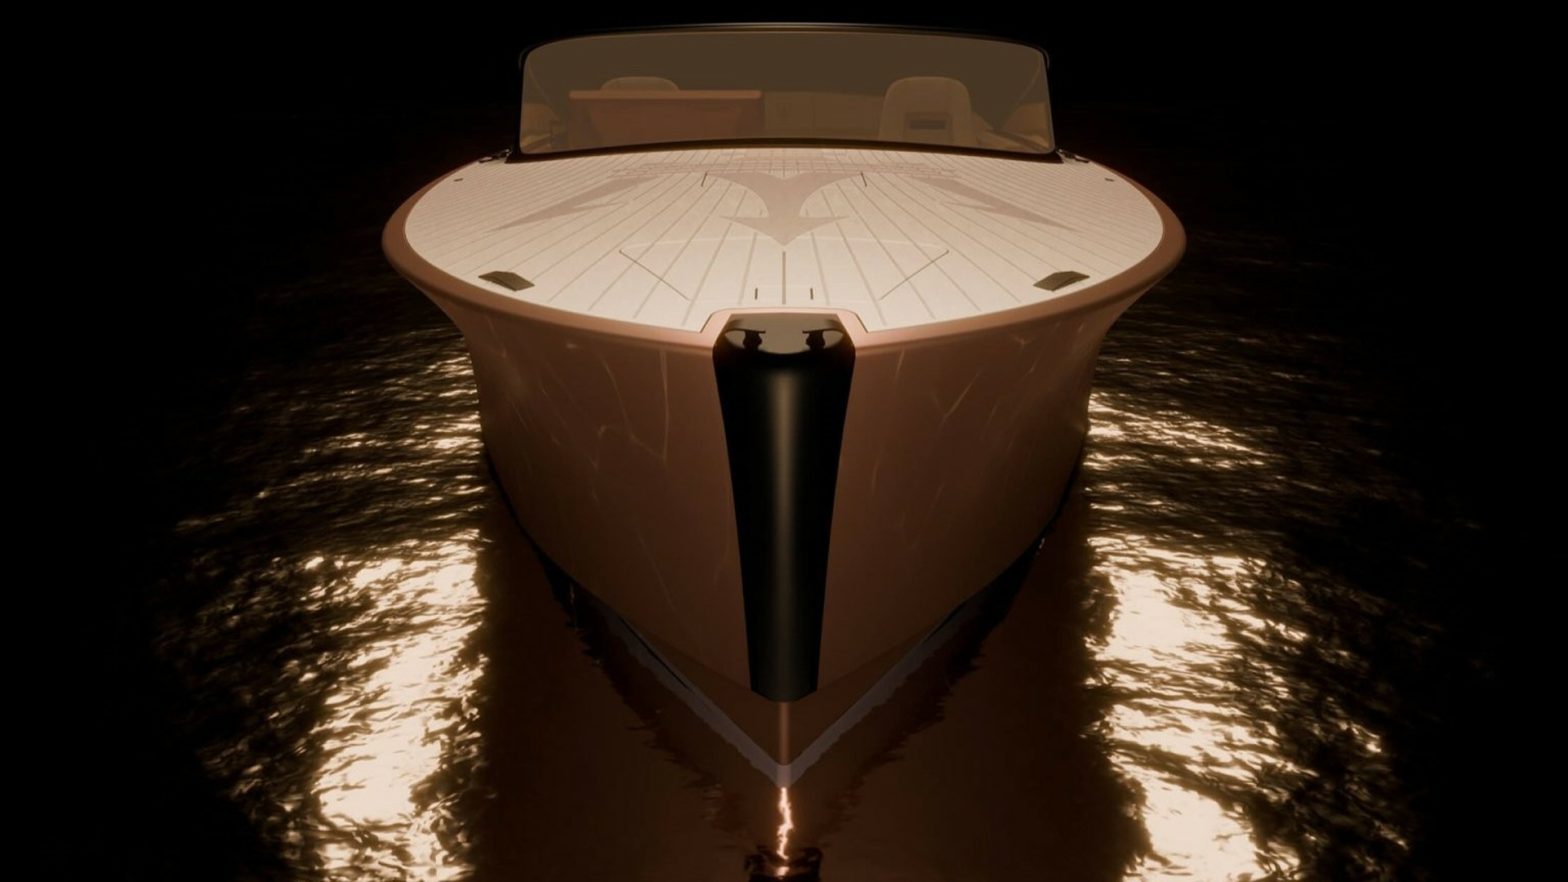 Maserati's Electric Powerboat, The Tridente, Sets Sail For Luxury Yachting